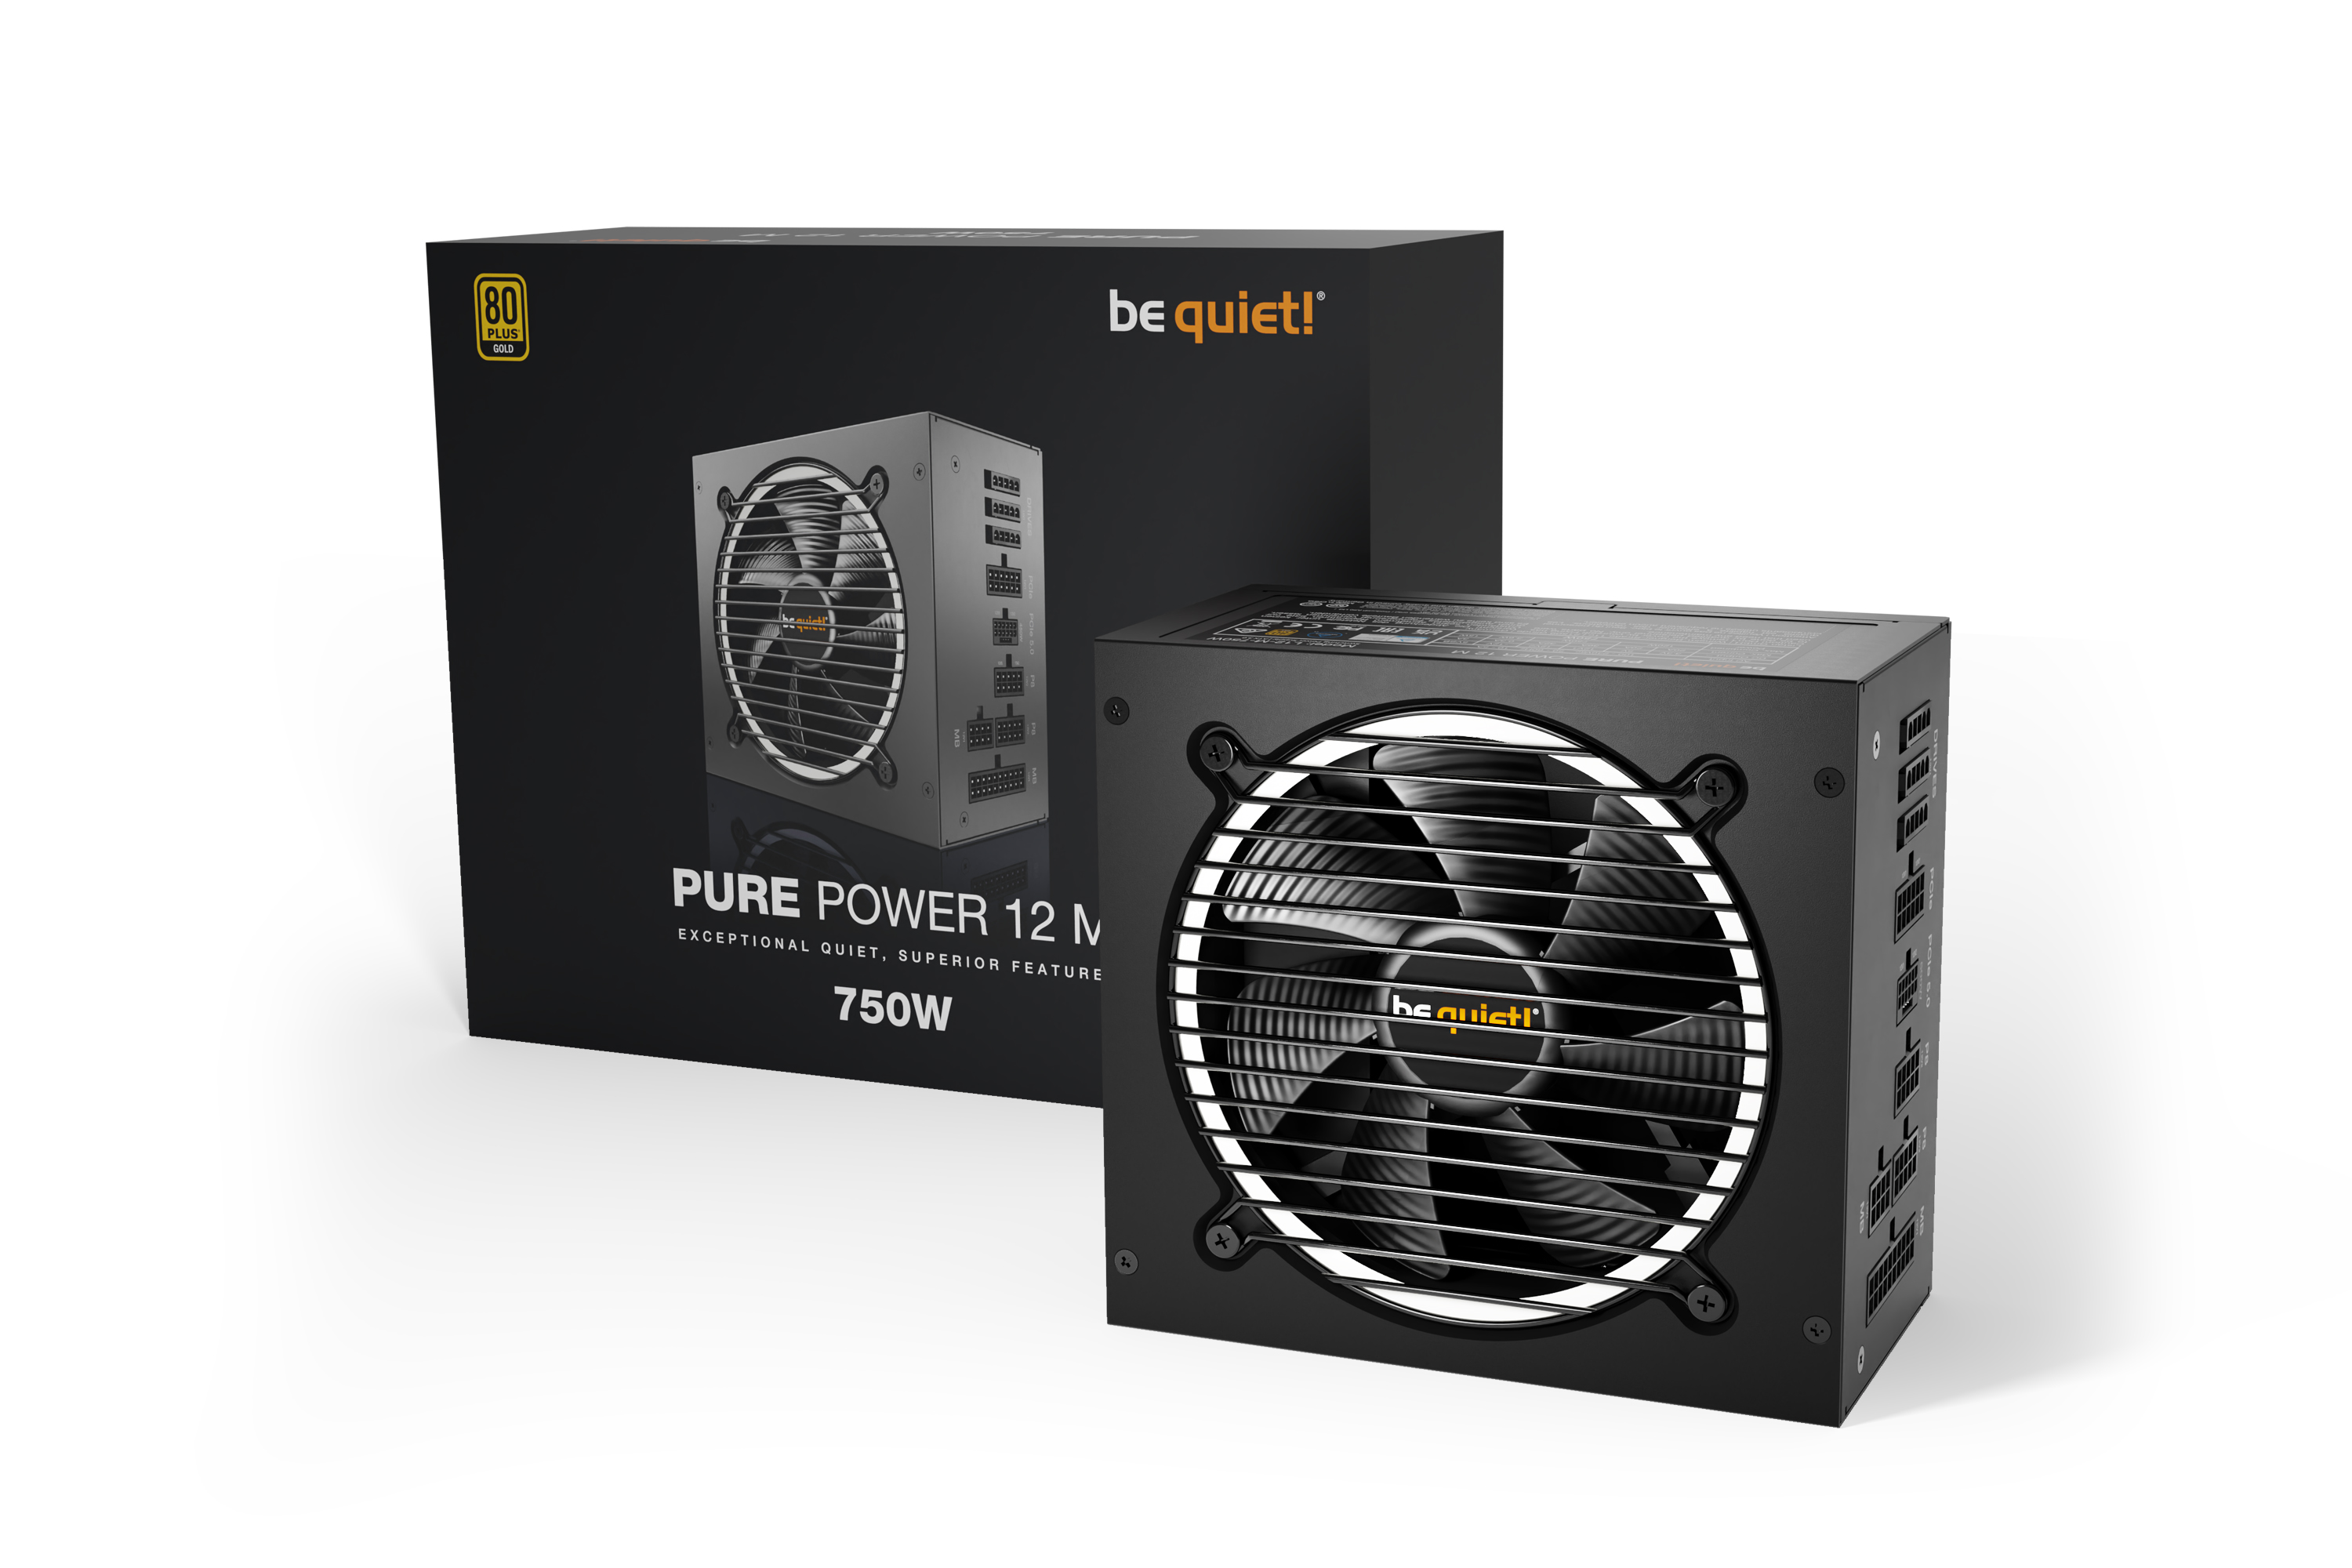   750W be quiet! Pure Power 12 M (BN343)